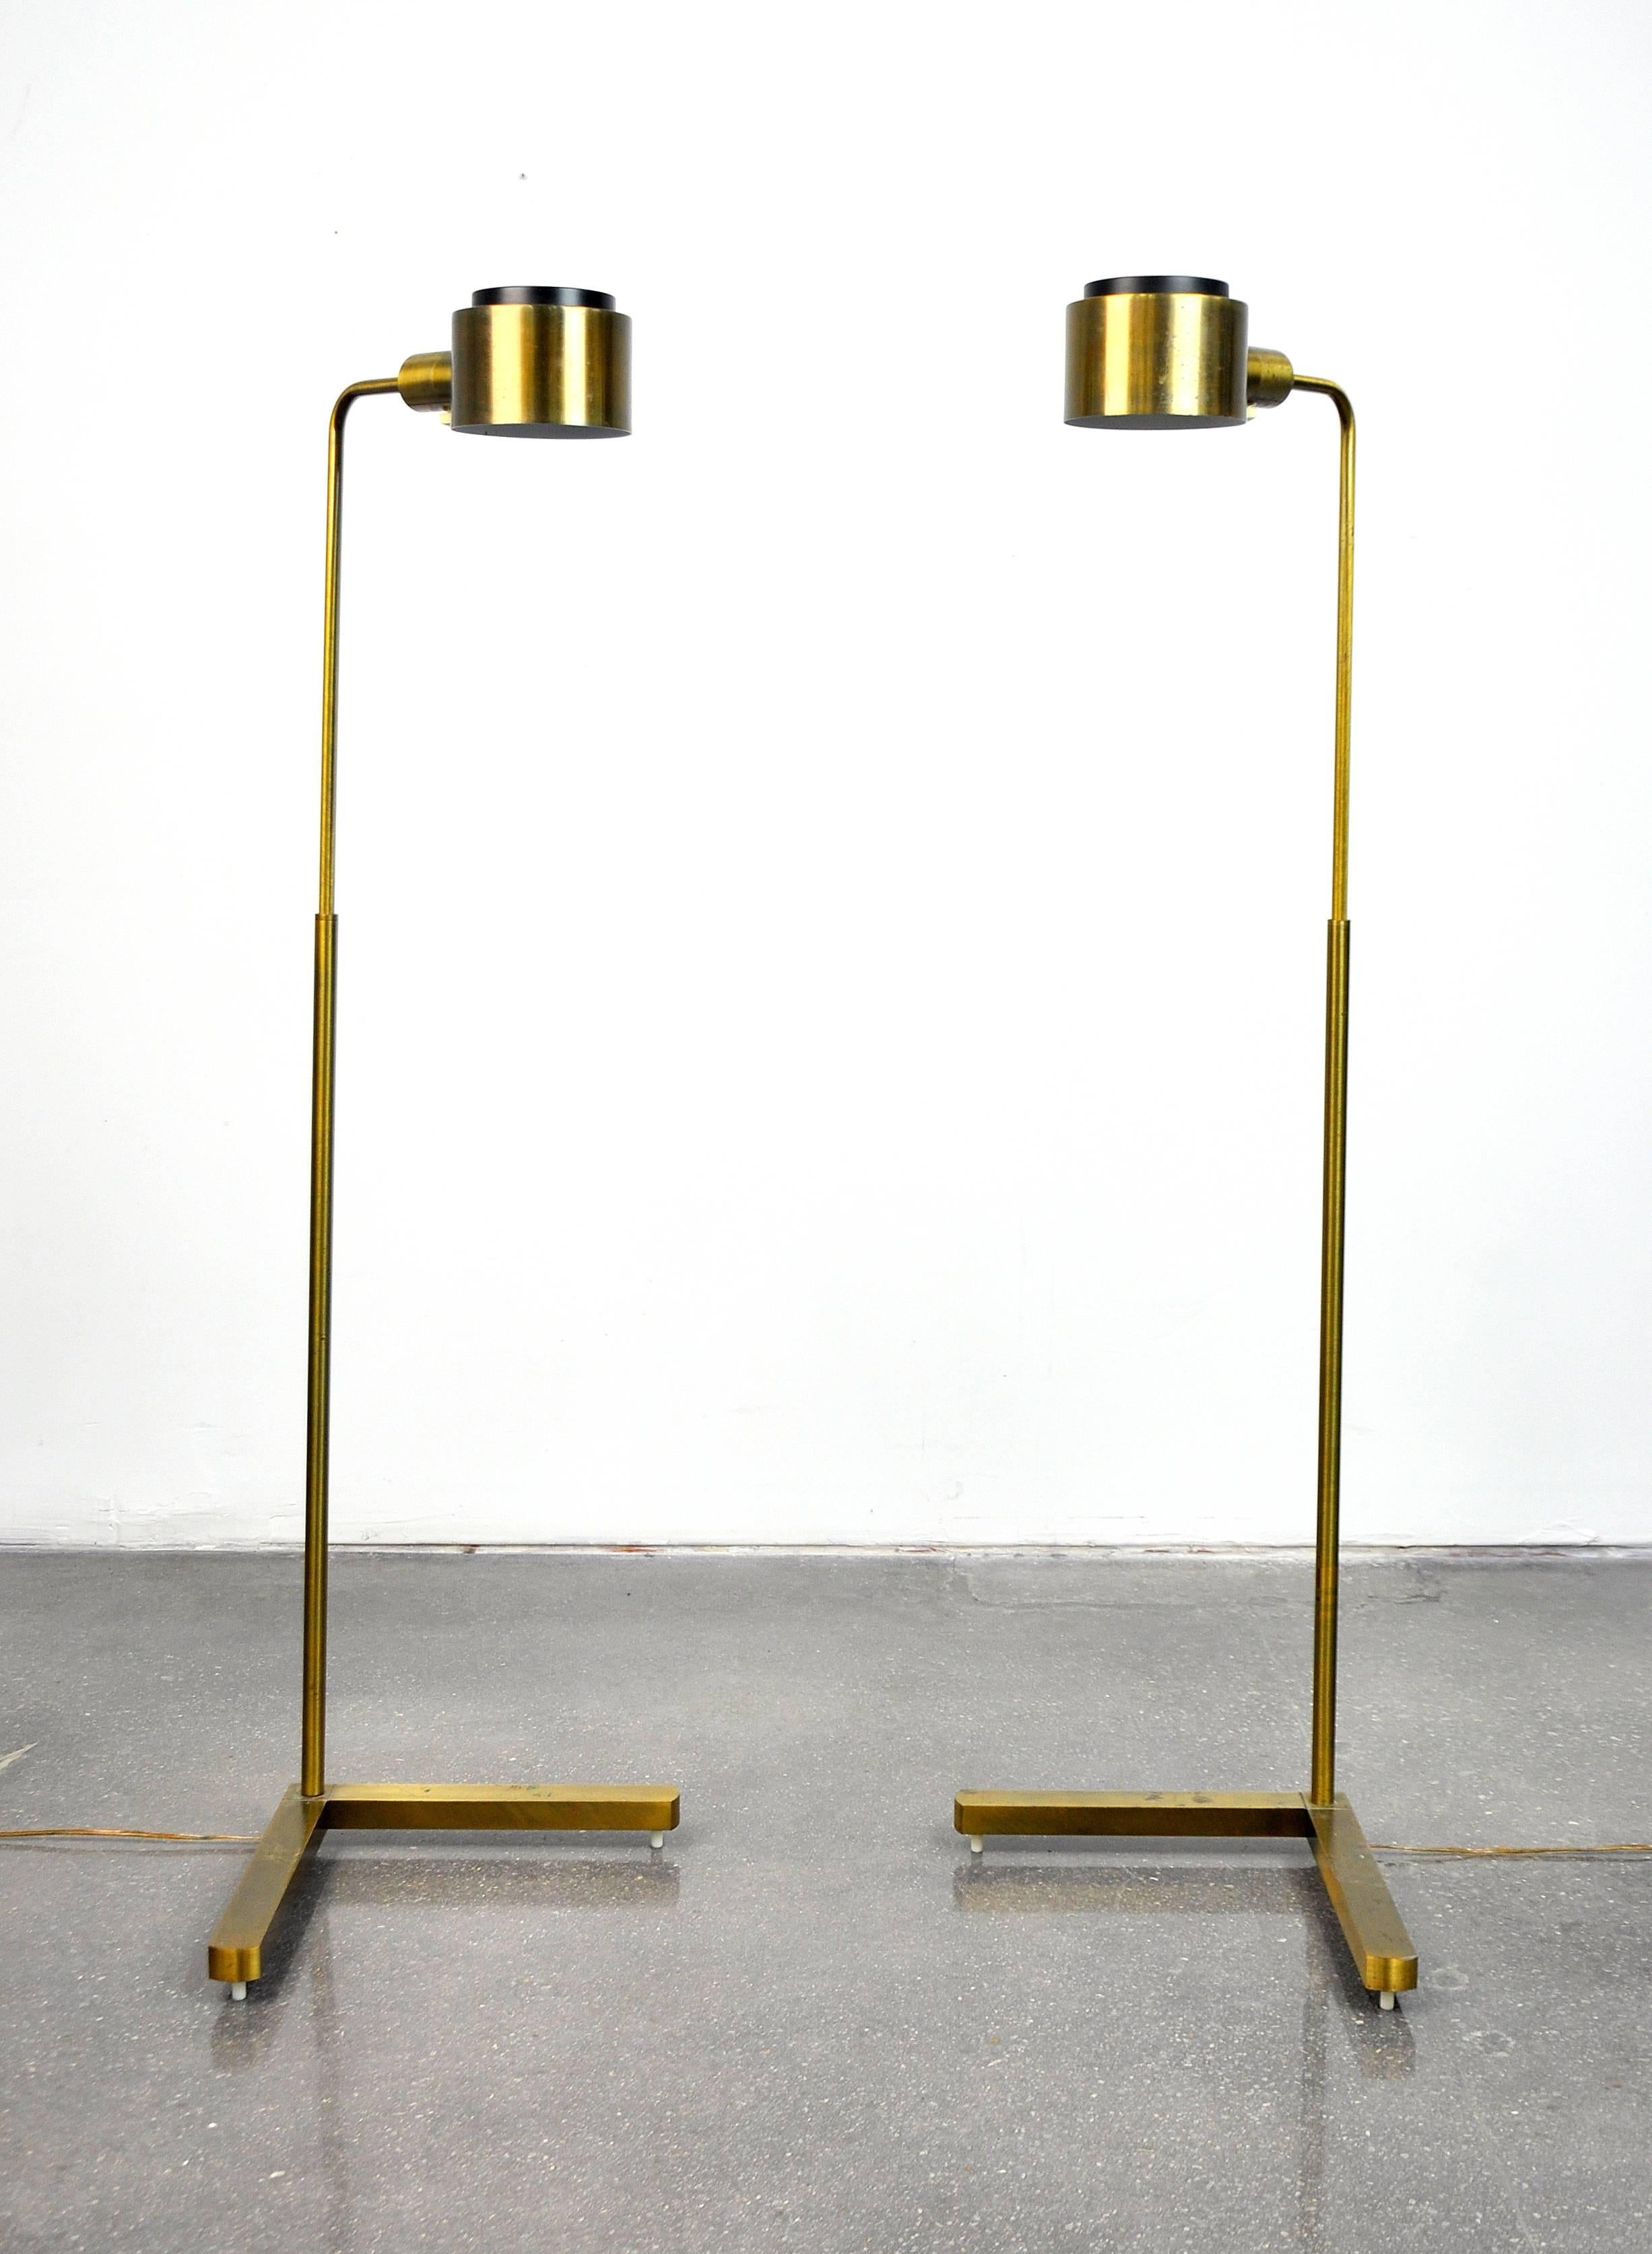 A great pair of vintage Mid-Century Modern C1139G Pharmacy corner task lamps with antique brass finish, G-shades and V-bases in the Cedric Hartman style. Each reading lamp has an adjustable height to a maximum of 49.75 inches, and a full range